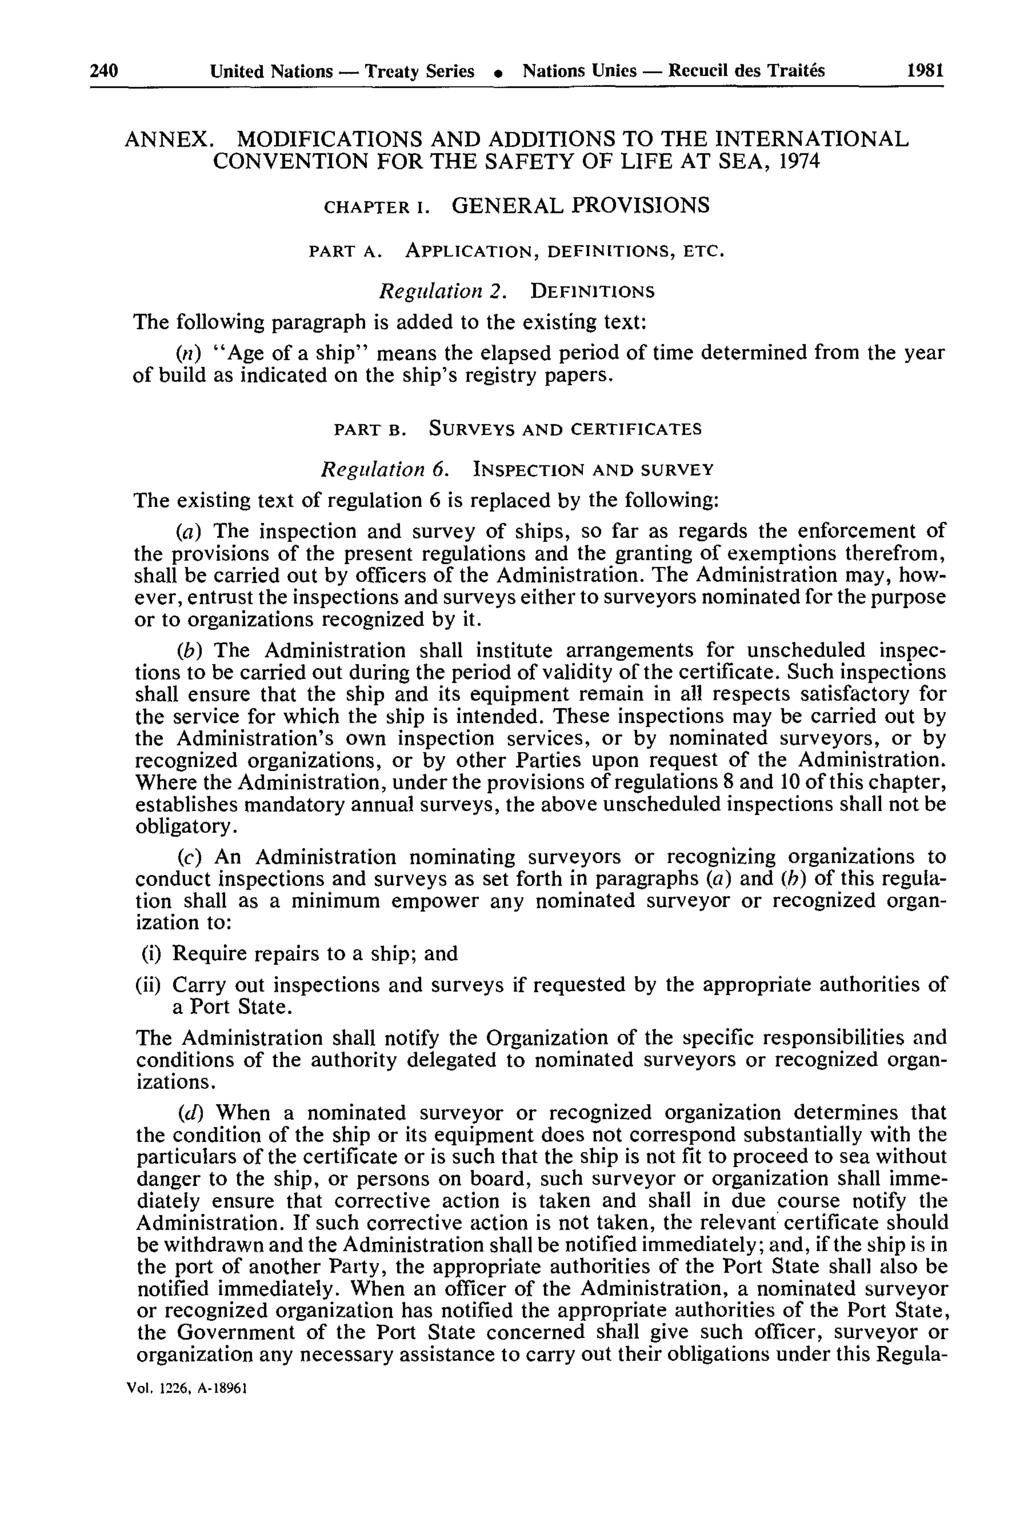 240 United Nations Treaty Series Nations Unies Recueil des Traités 1981 ANNEX. MODIFICATIONS AND ADDITIONS TO THE INTERNATIONAL CONVENTION FOR THE SAFETY OF LIFE AT SEA, 1974 CHAPTER i. PART A.